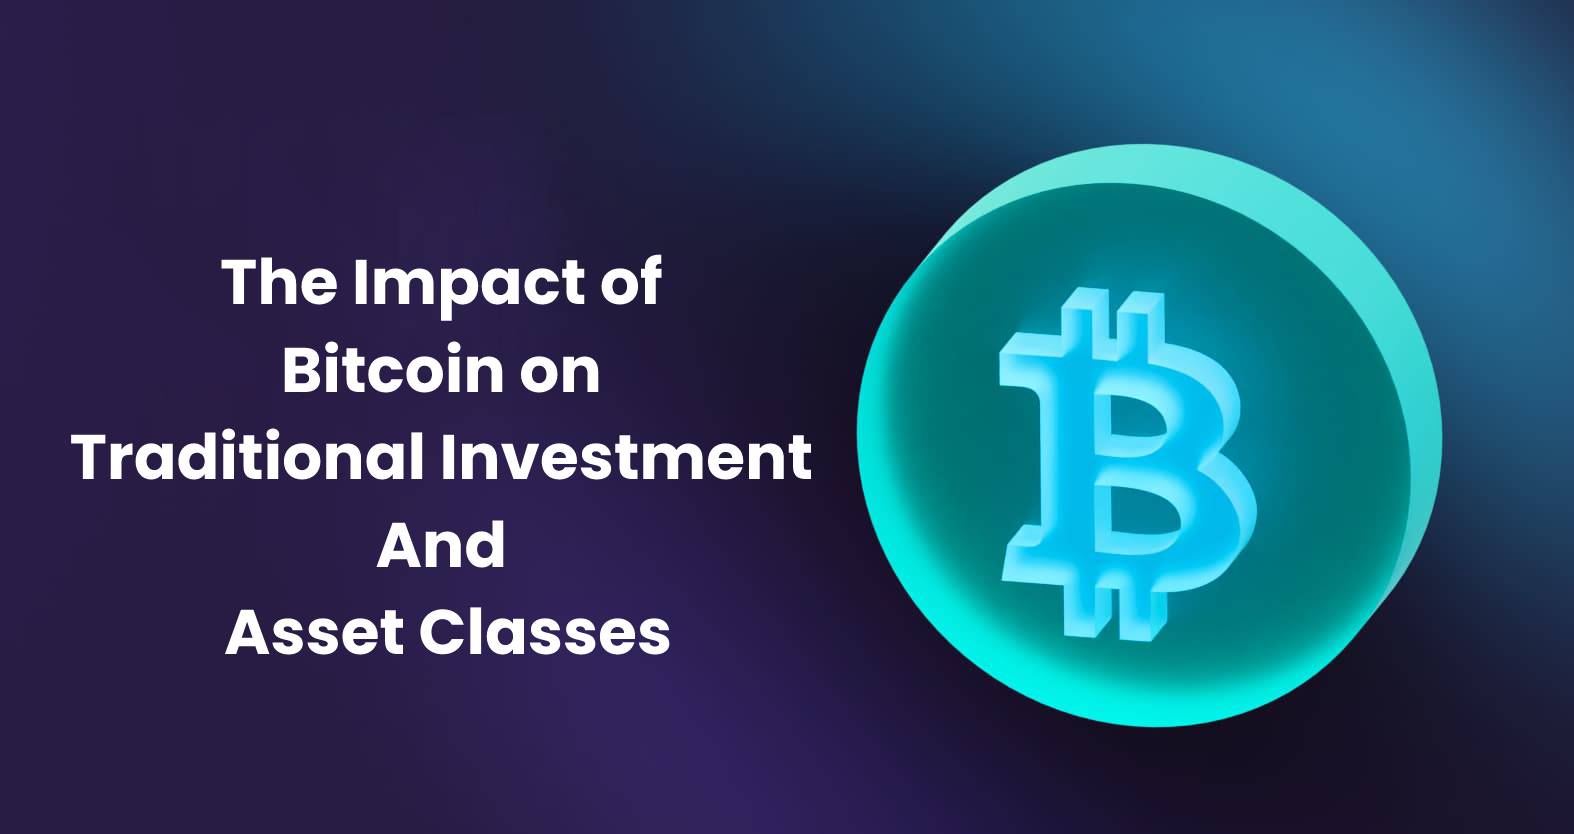 The Impact of Bitcoin on Traditional Investment And Asset Classes